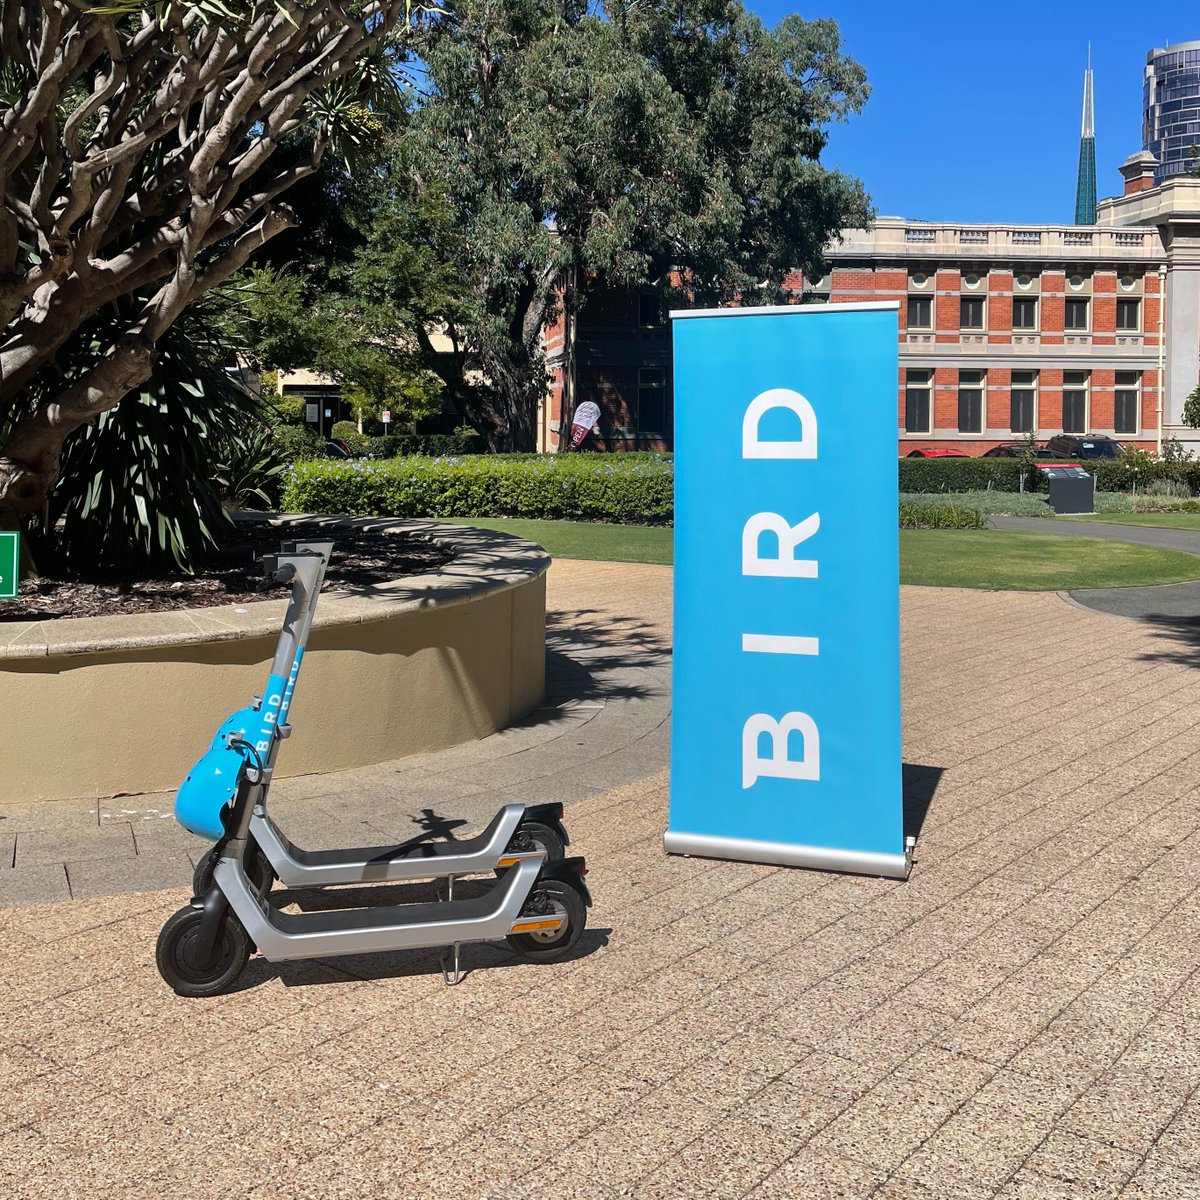 We're thrilled to be launching in @CityOfPerth this weekend! As of this weekend, Bird will be available. Download the Bird app, and keep your eye out, we’re ready to take you where you need to go. 🛴 Download the Bird app now: go.bird.co #micromobility